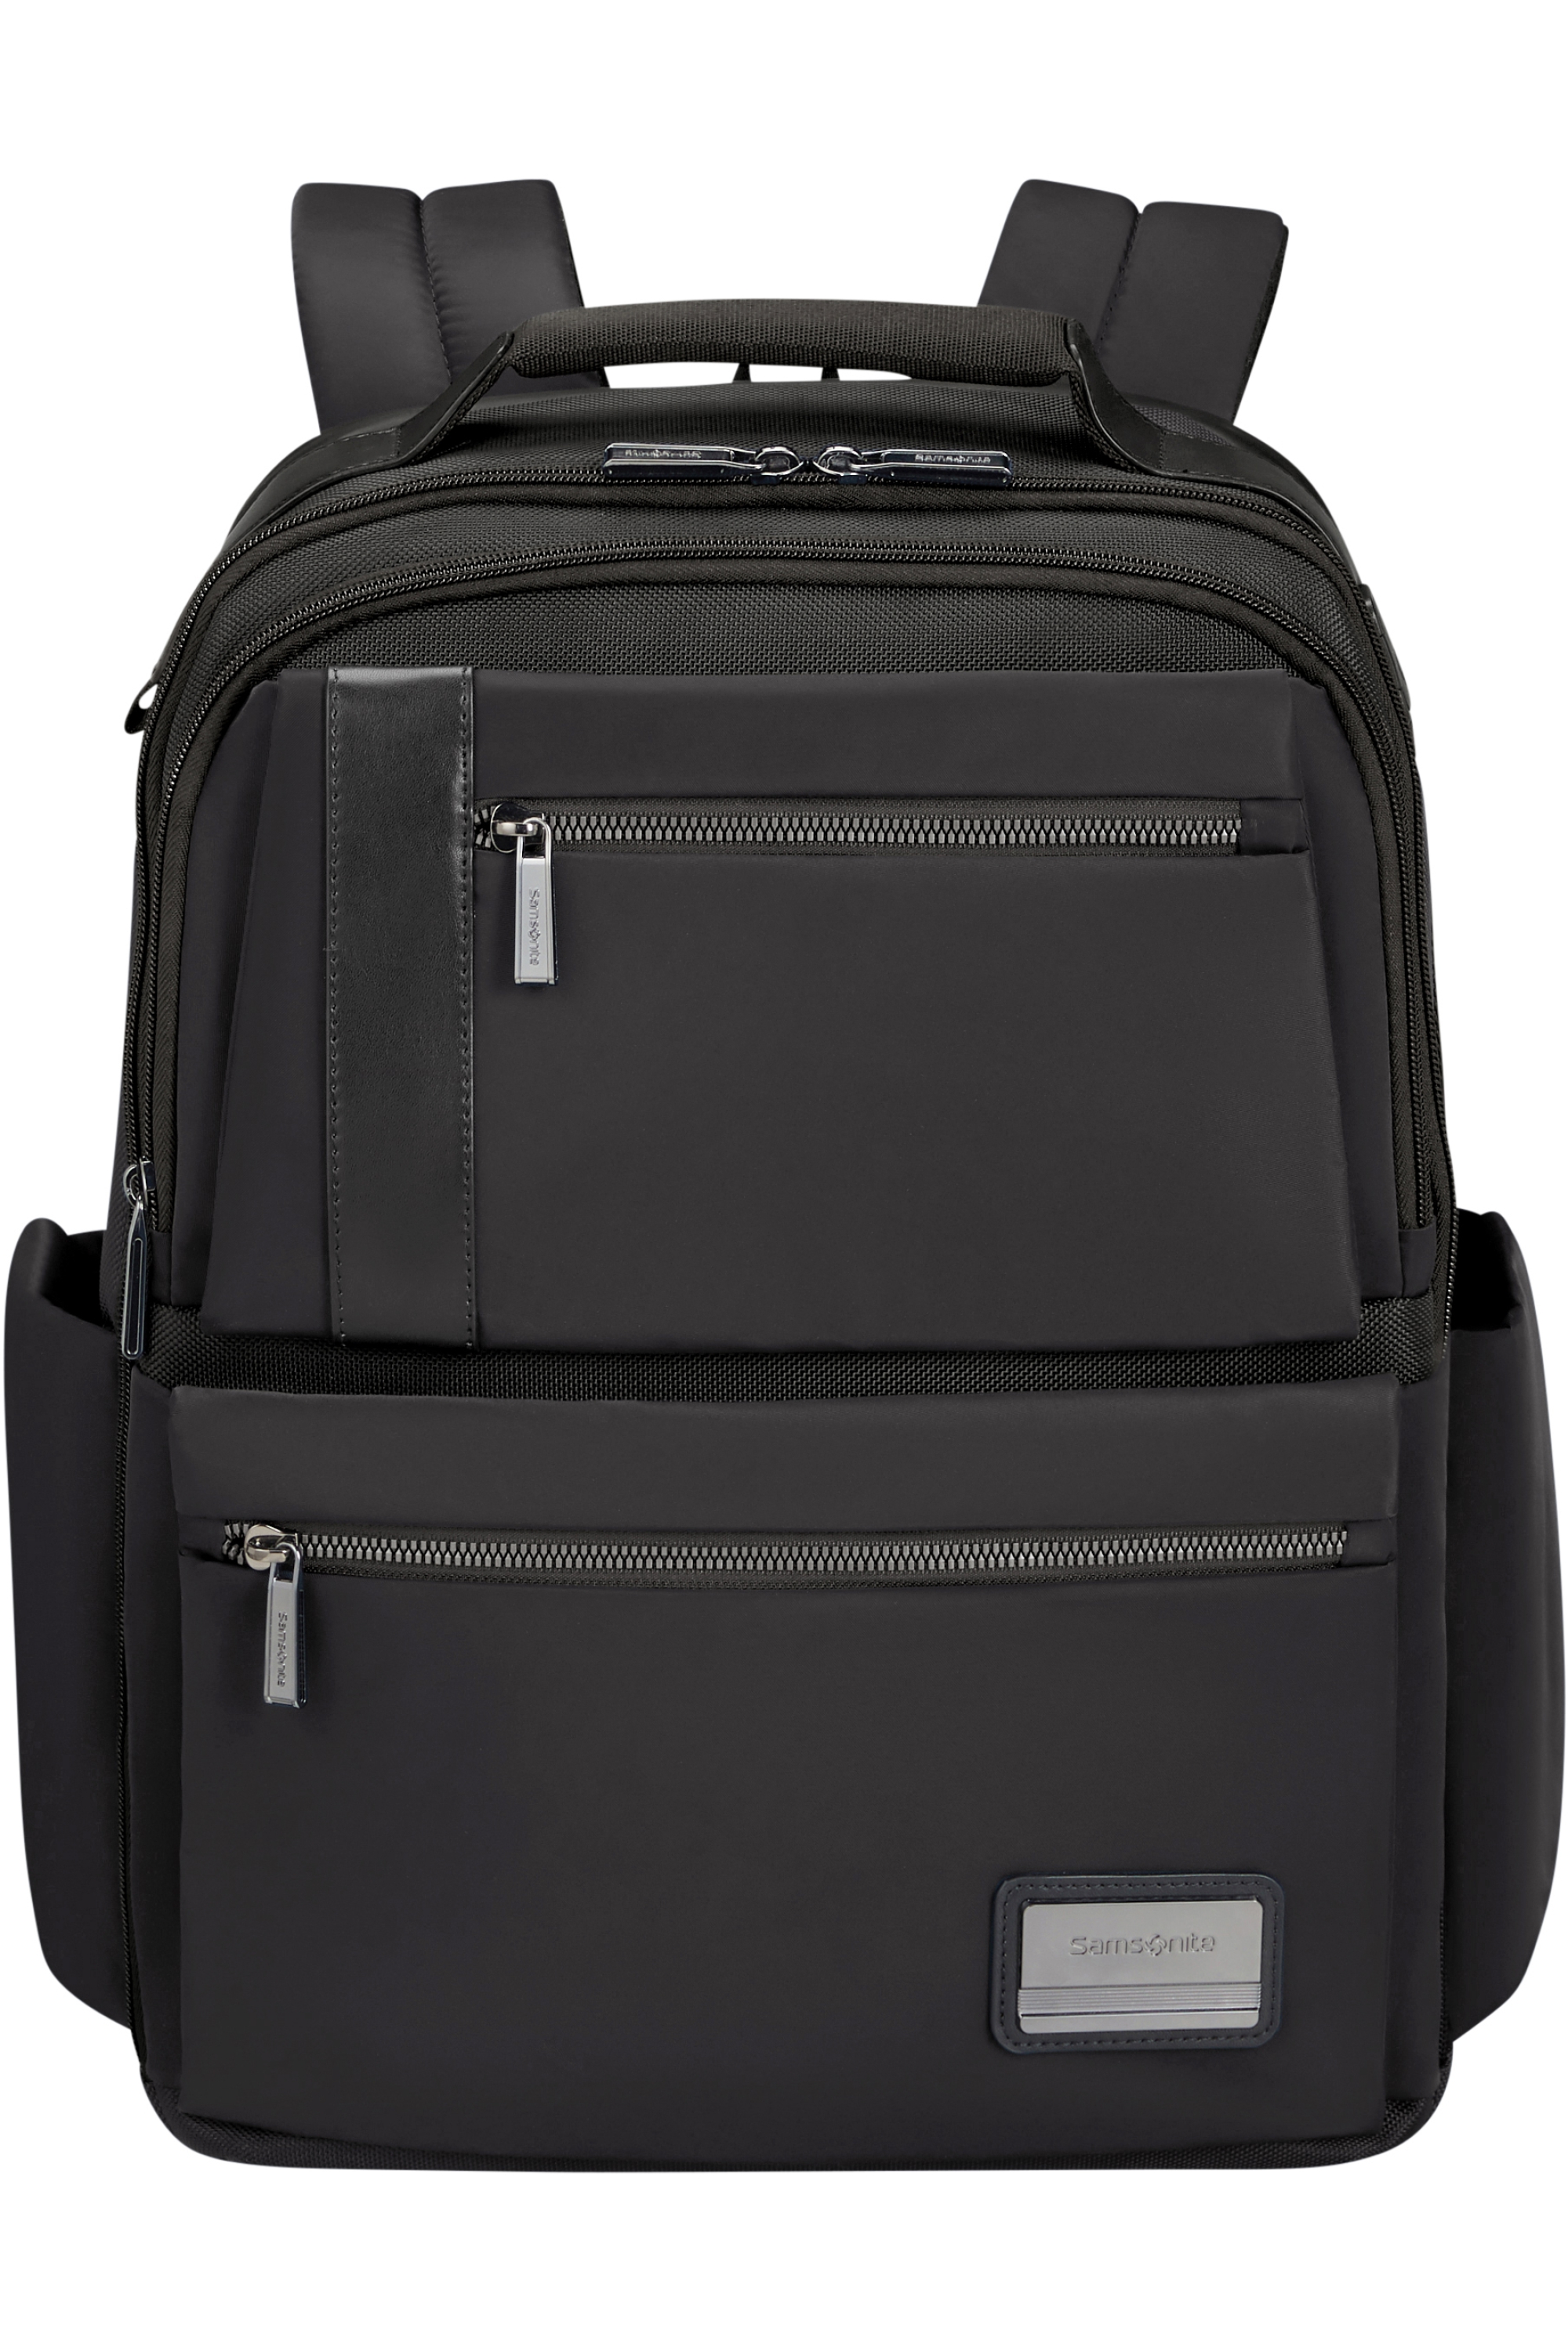 137208-1041-137208_1041_openroad_2-0_laptop_backpack_15-6_front-5b1bf600-8a26-4db2-92f6-acbb00e75175-png